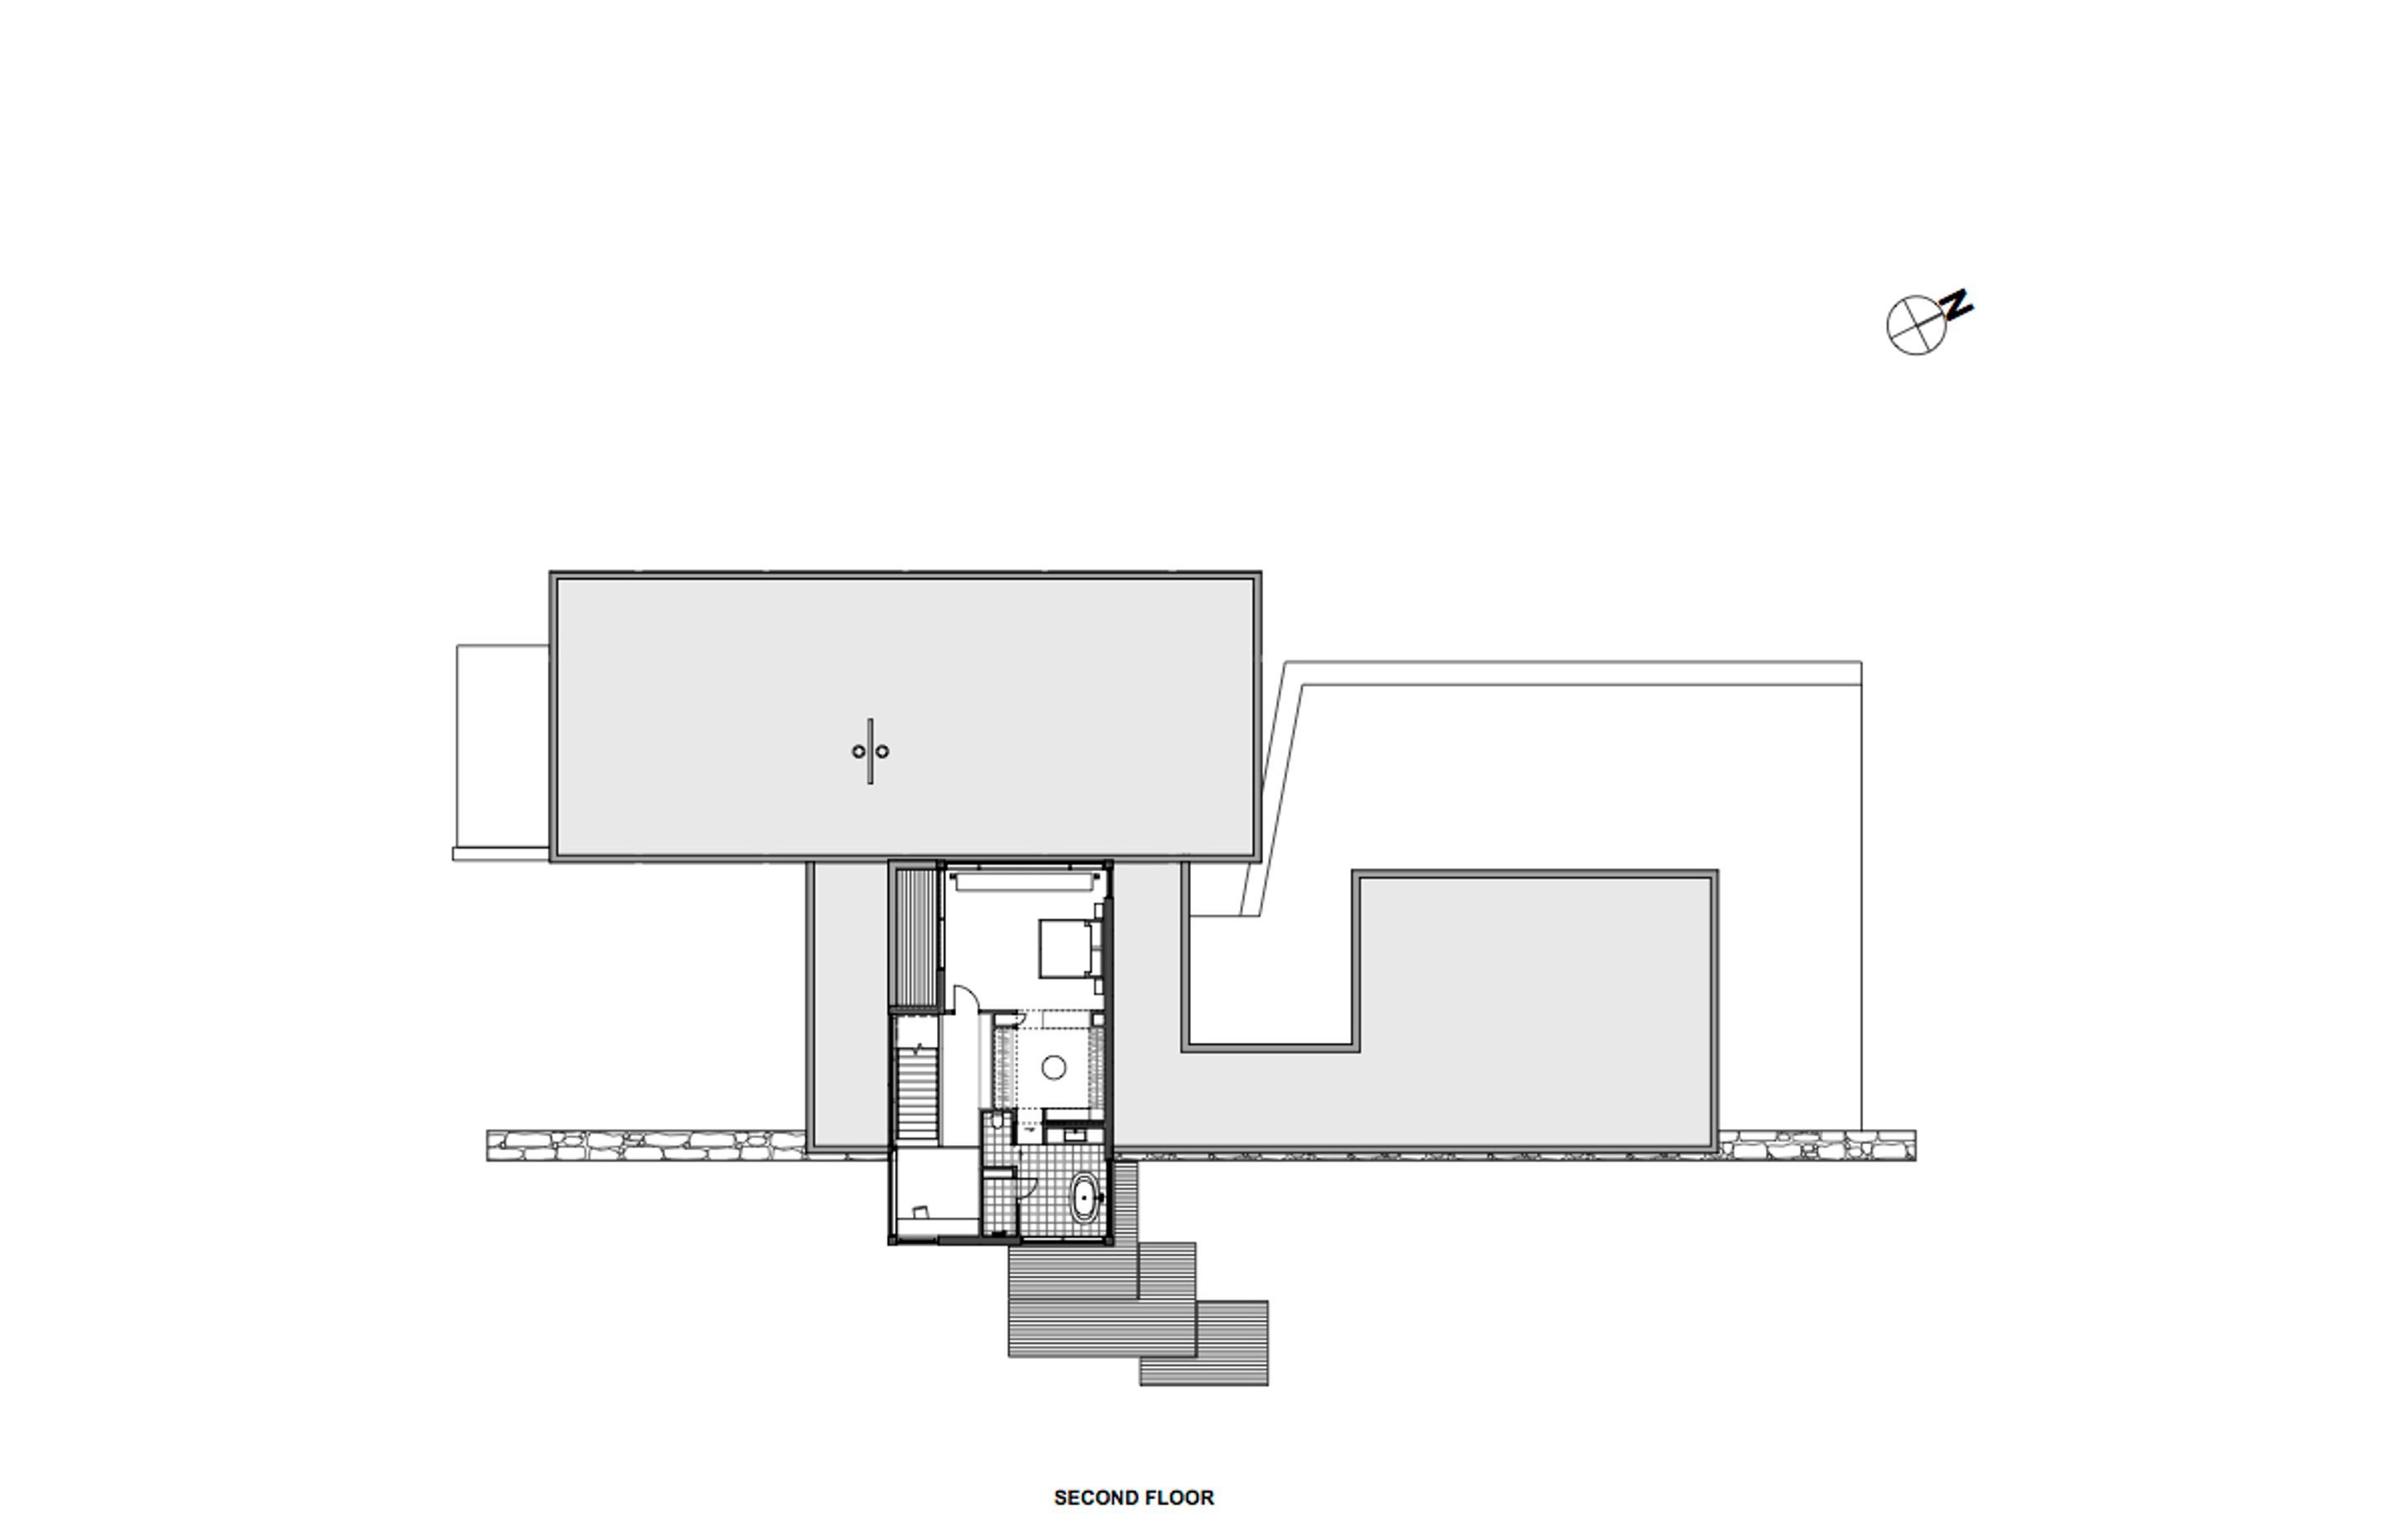 Second-floor plan by Team Green Architects.